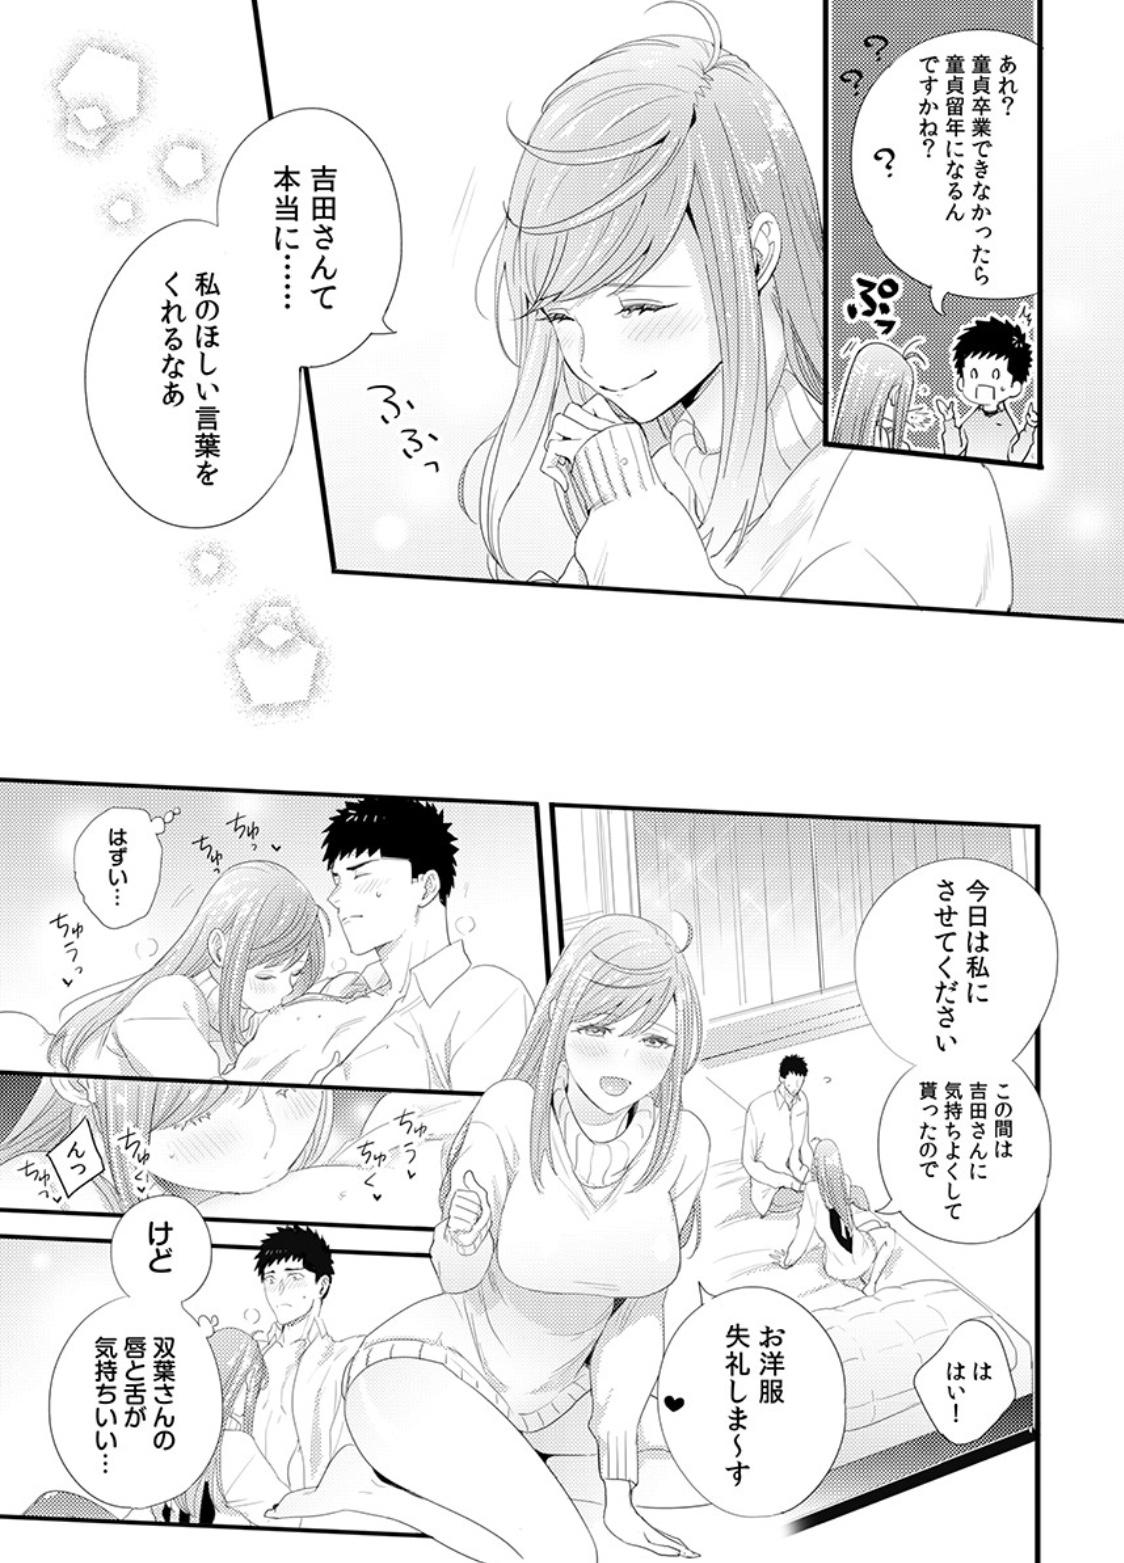 Please Let Me Hold You Futaba-San! Ch. 1-4 48